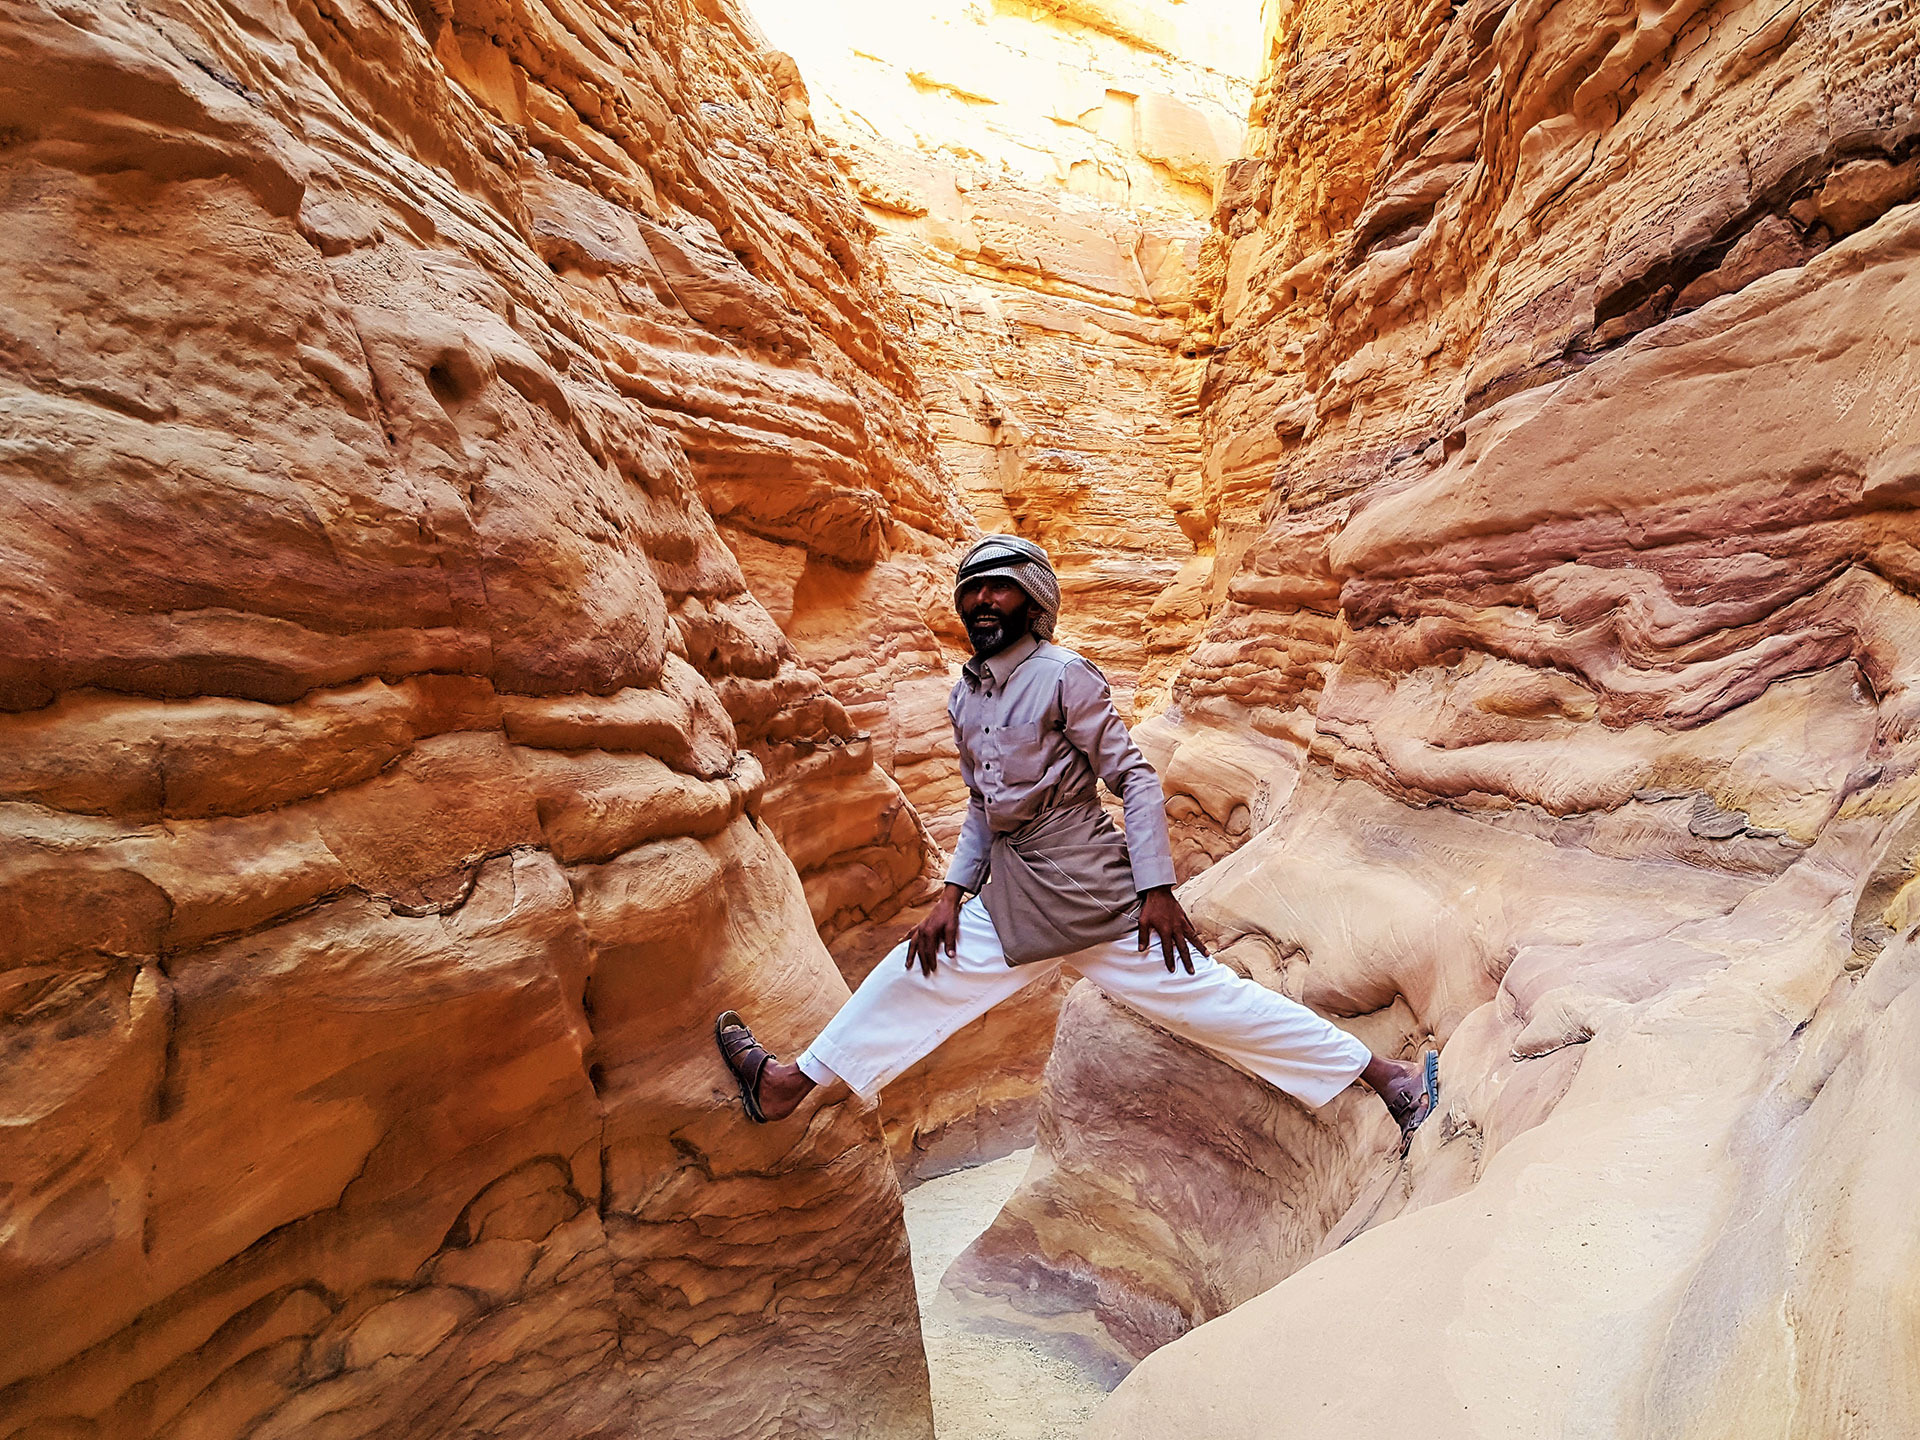 Musallem in the Sinai desert straddling two rocks in a canyon